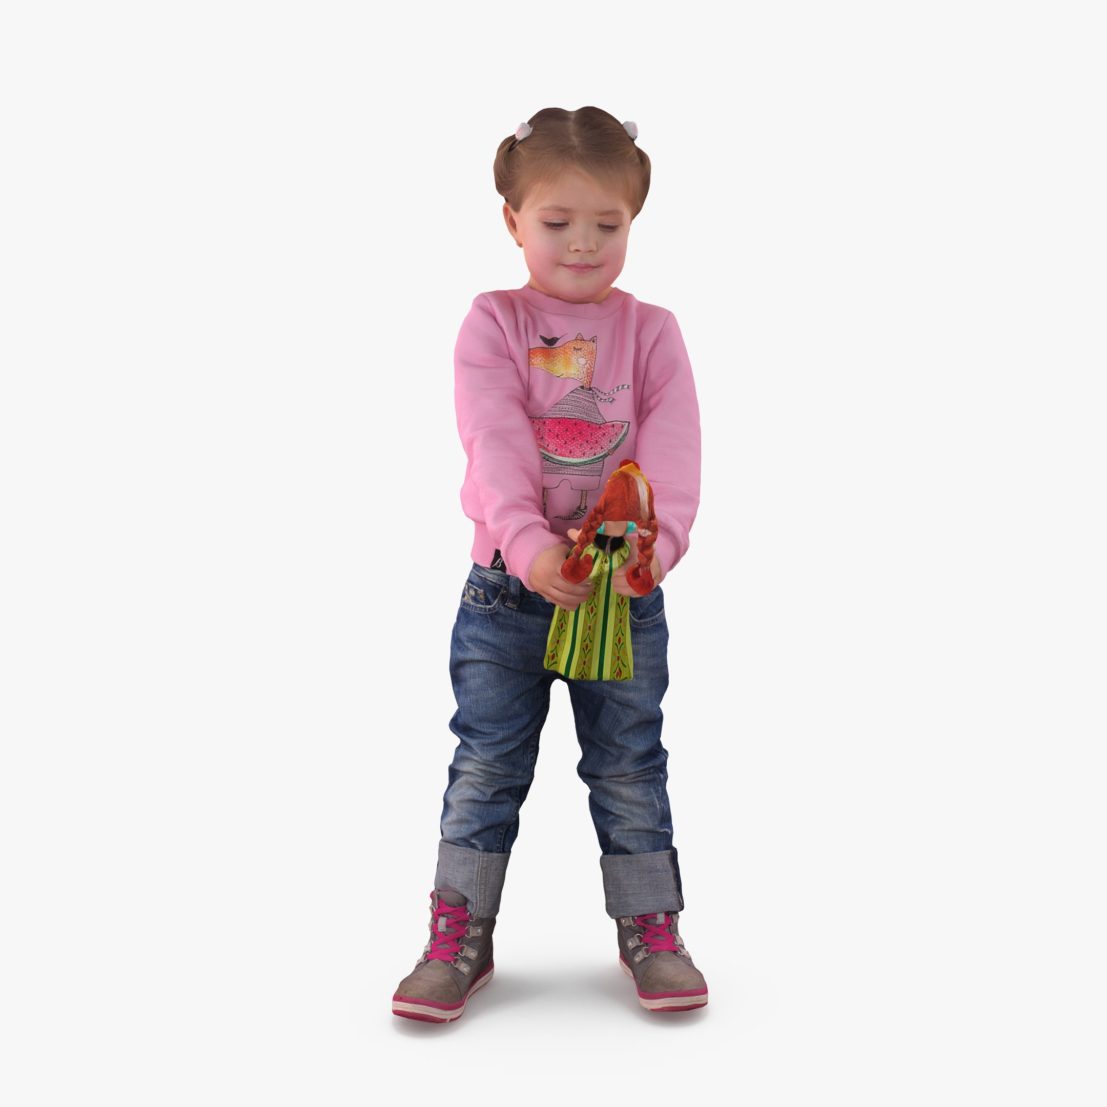 Girl With a Doll 3D Model | 3DTree Scanning Studio